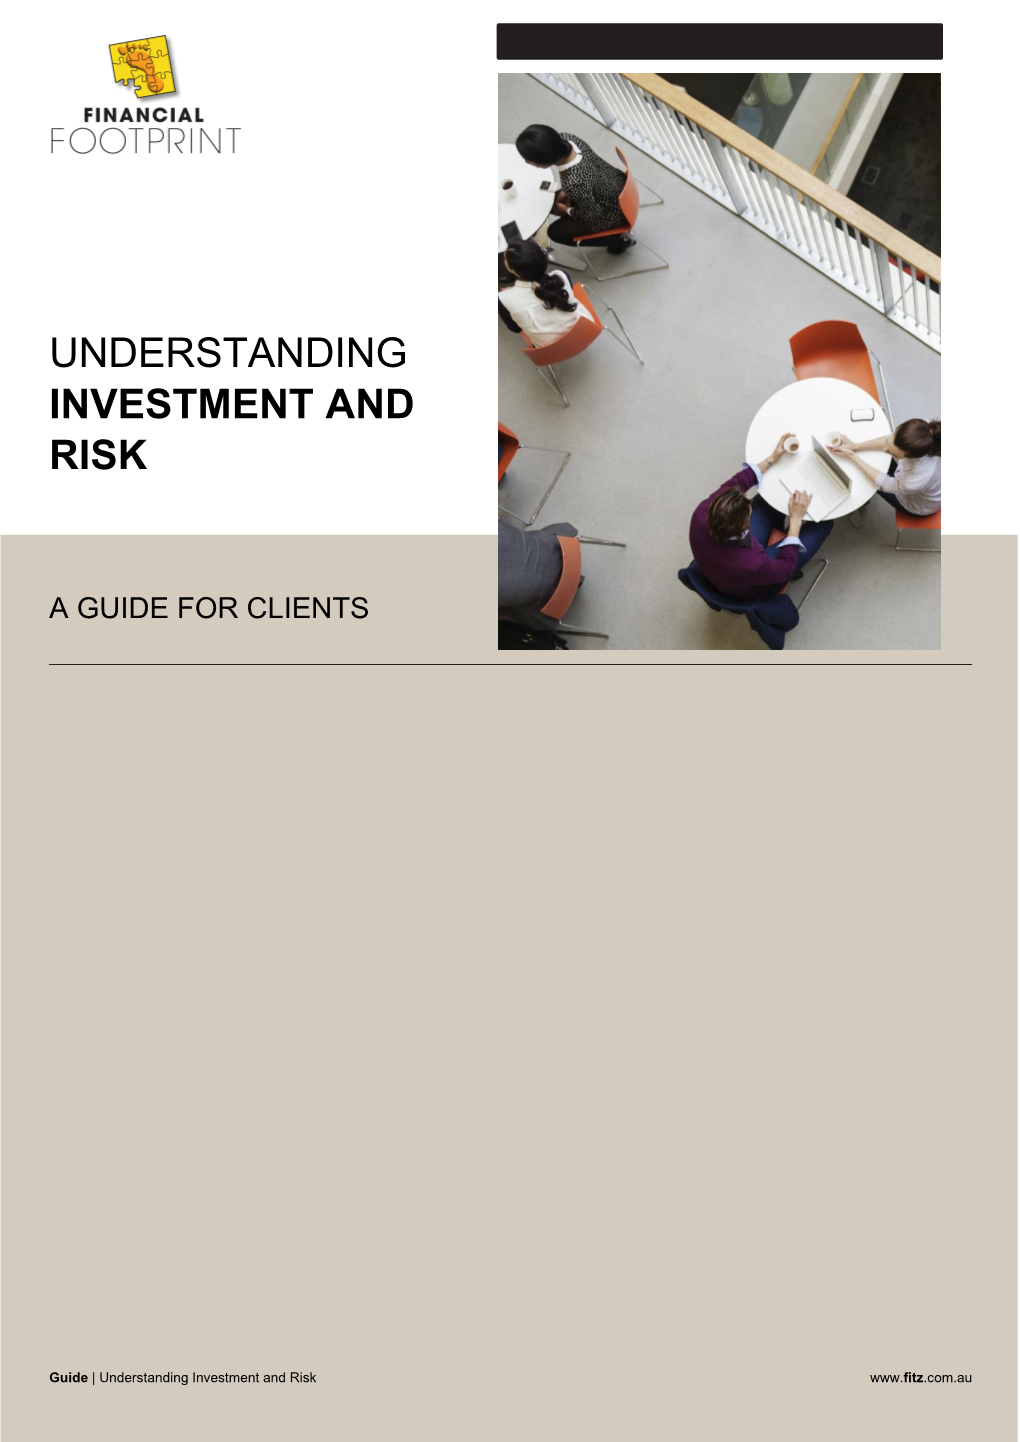 Understanding Investment Risk Guide for Clients